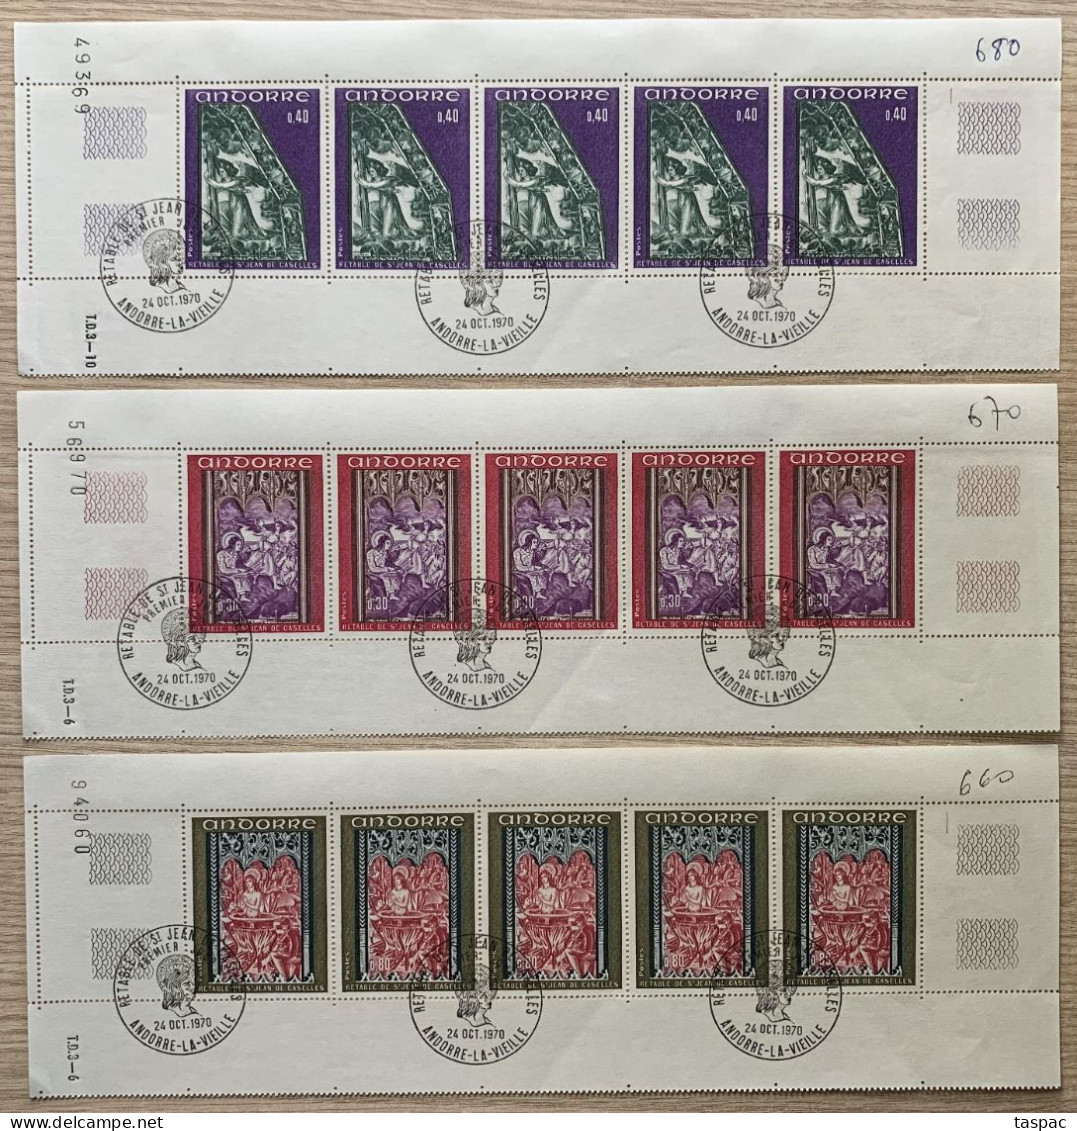 French Andorra 1970 Mi# 226-228 Used - Set In Strips Of 5 - The Revelation / Frescoes From The Altar Of St. John - Oblitérés